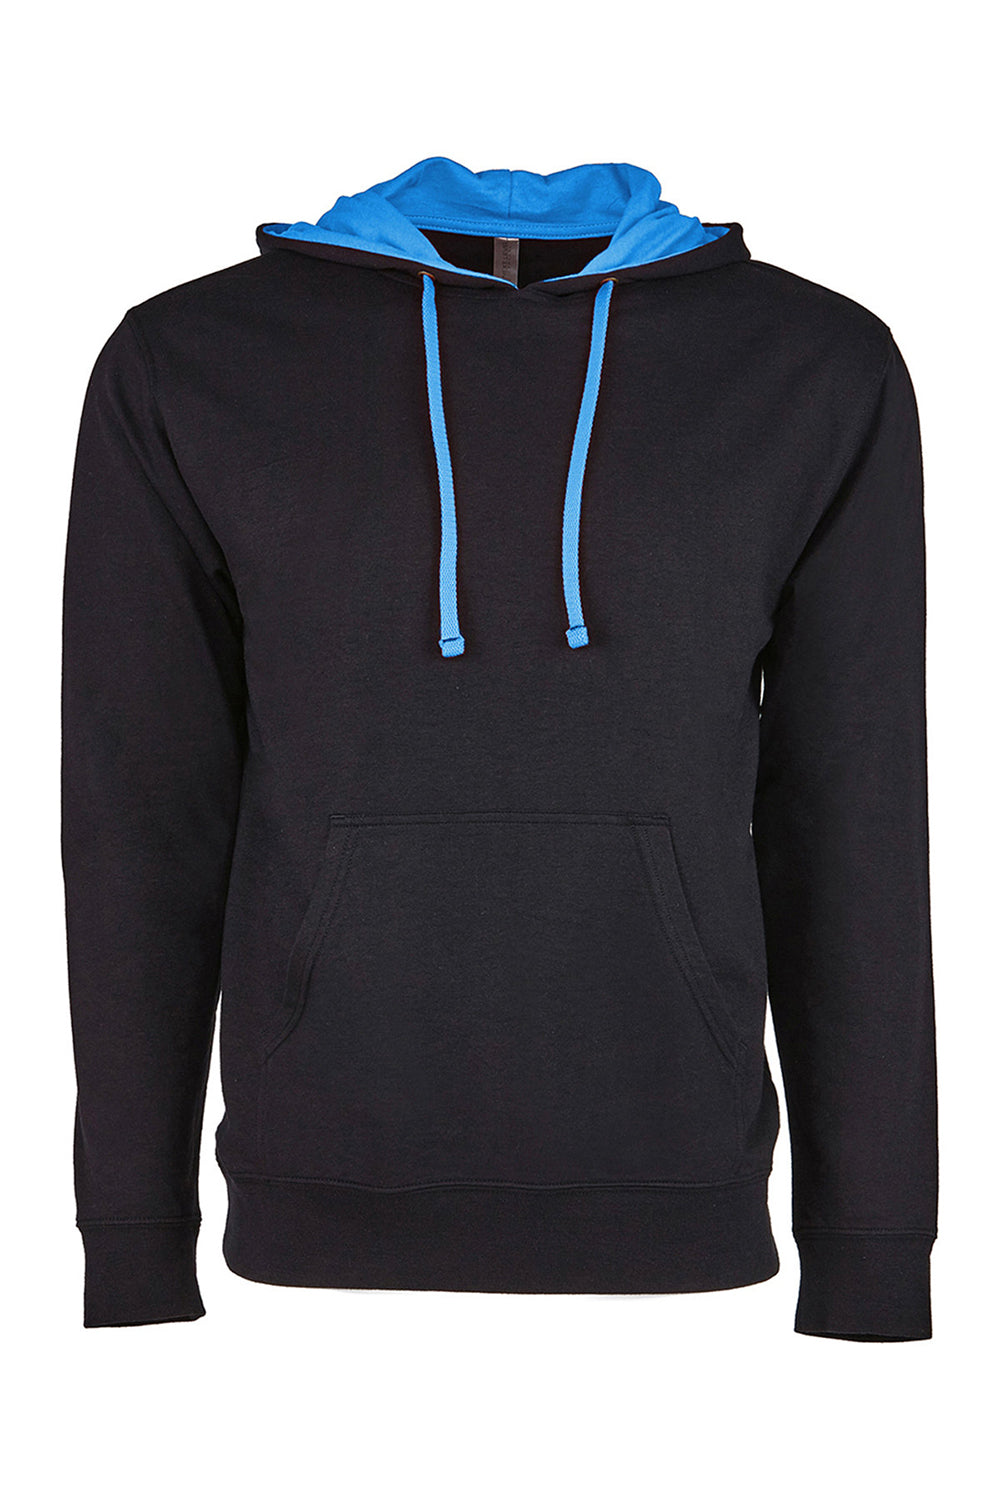 Next Level 9301 Mens French Terry Fleece Hooded Sweatshirt Hoodie Black/Turquoise Blue Flat Front